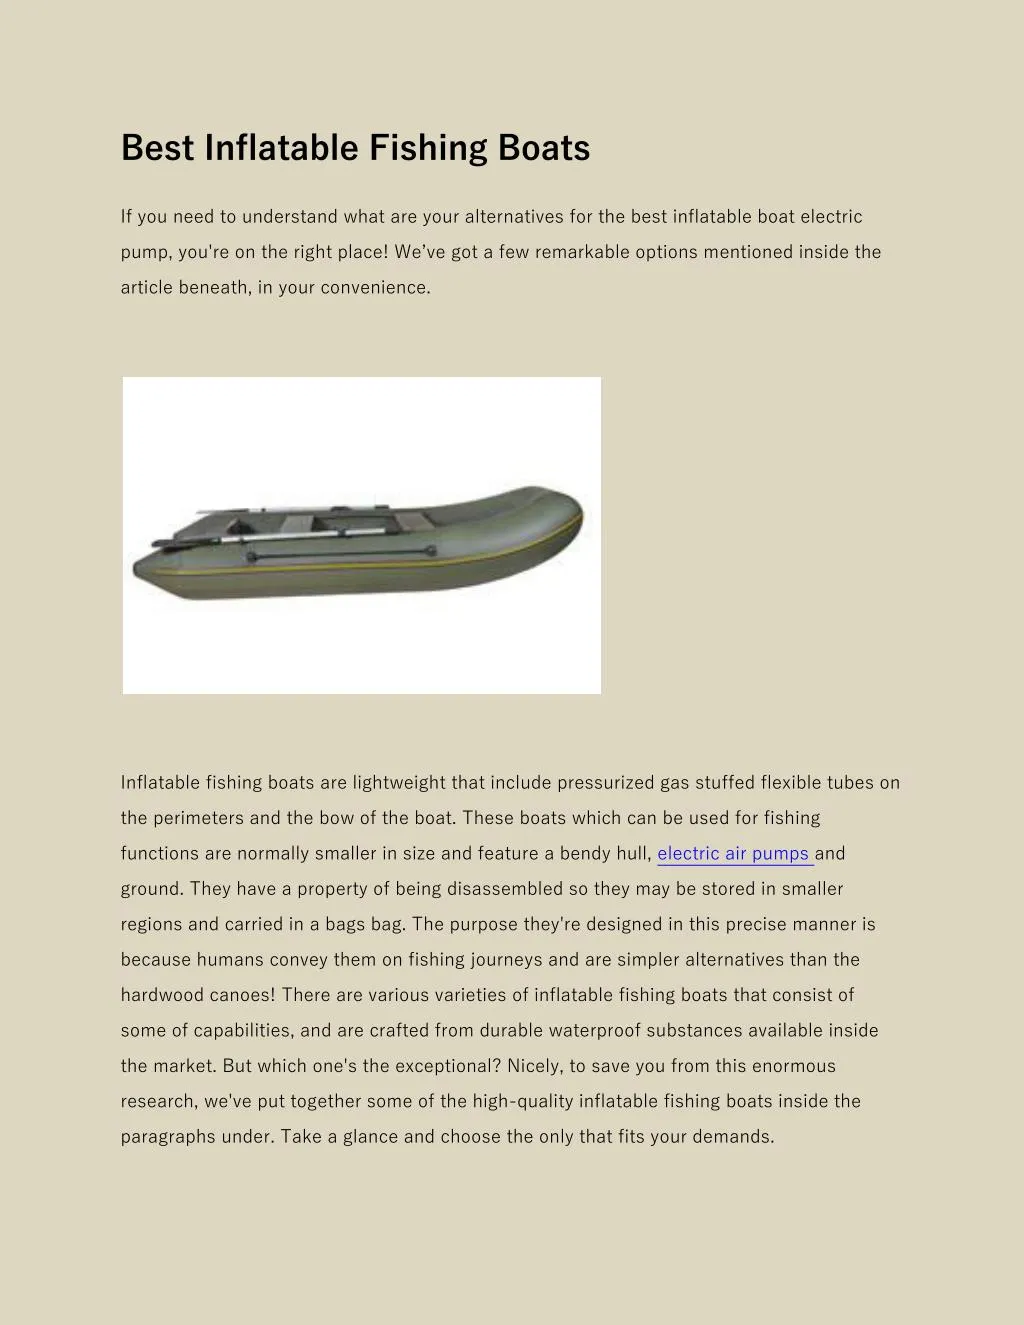 best inflatable fishing boats n.